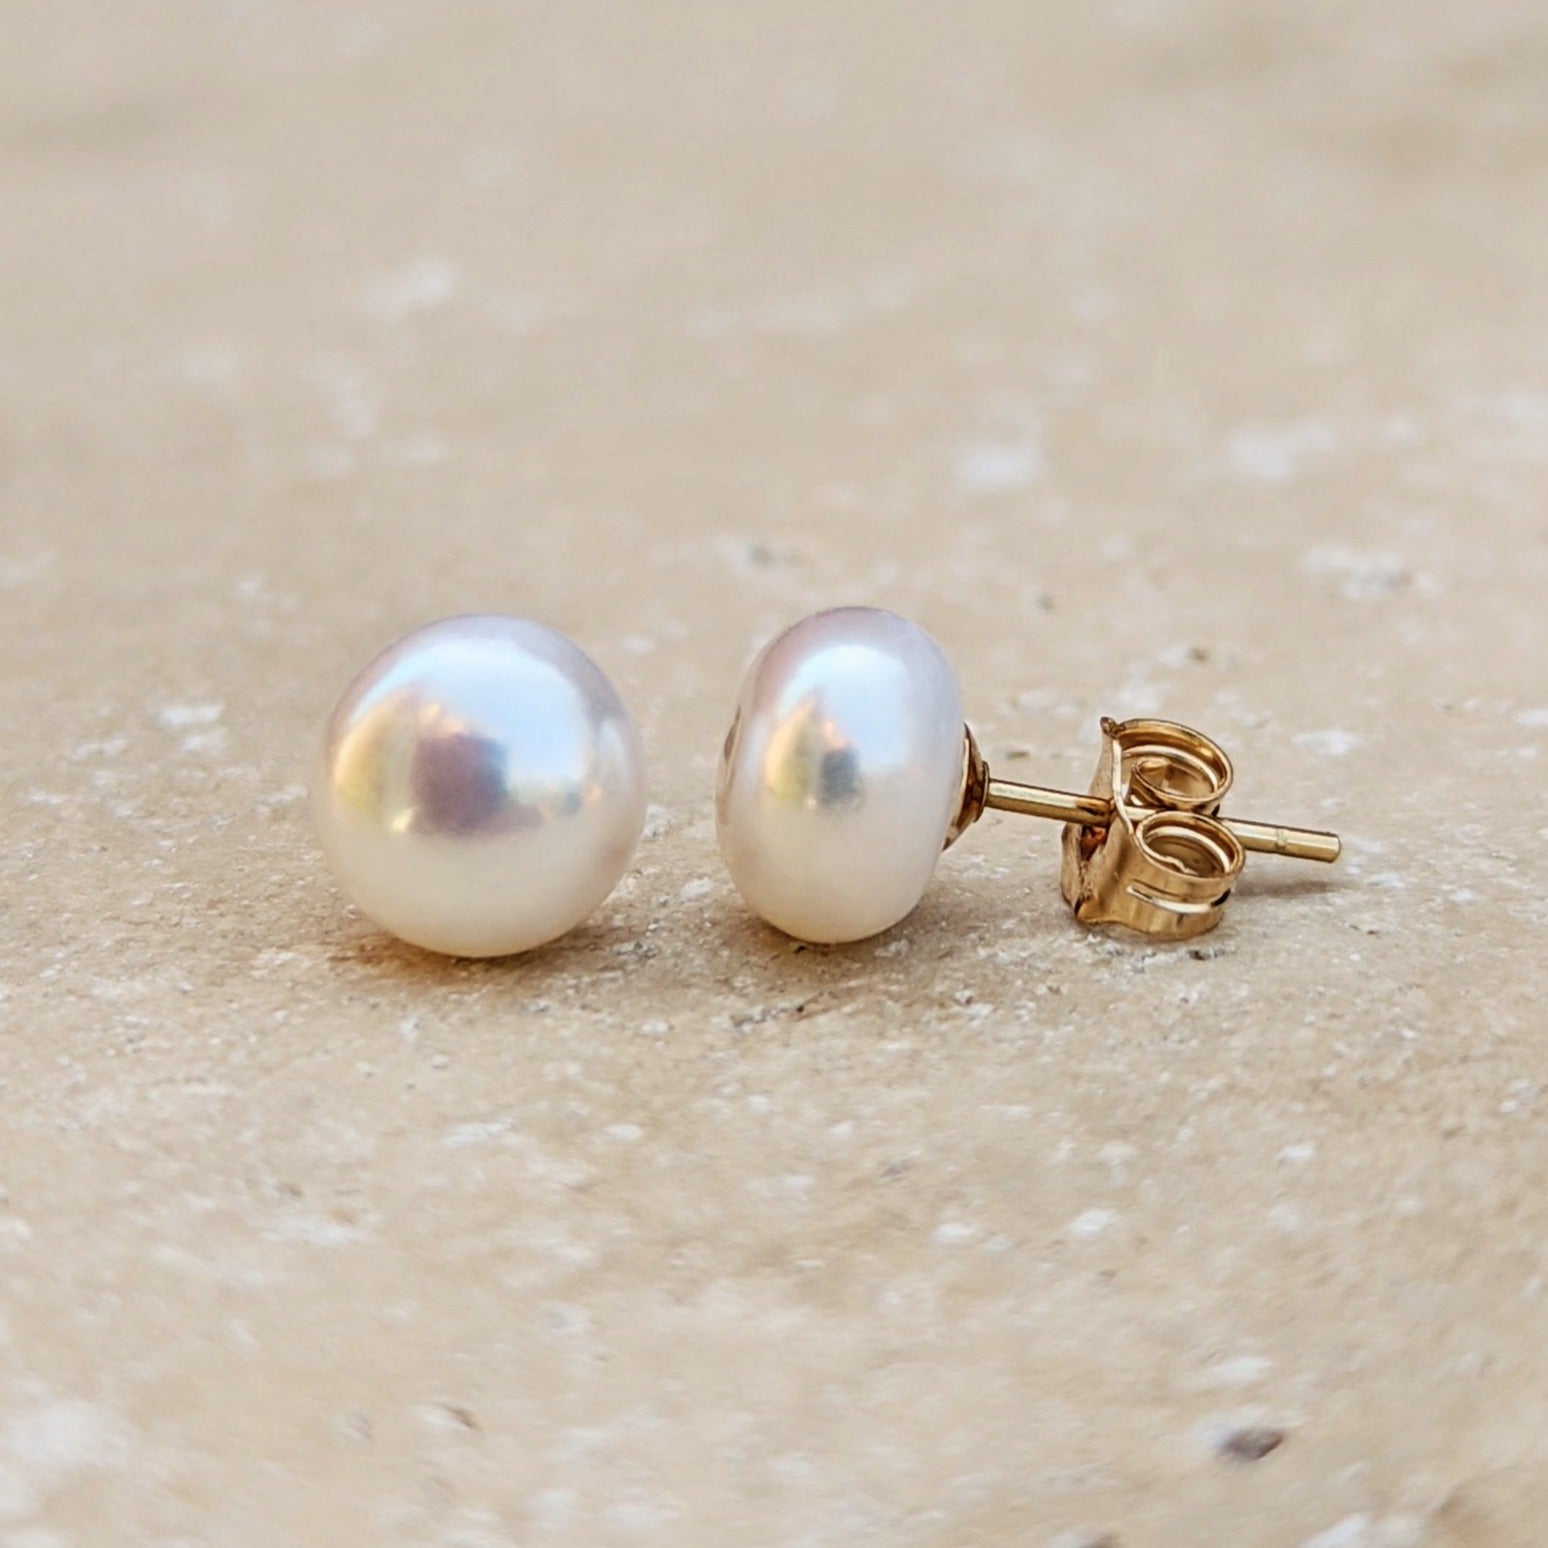 Pair of button pearl earrings in gold filled